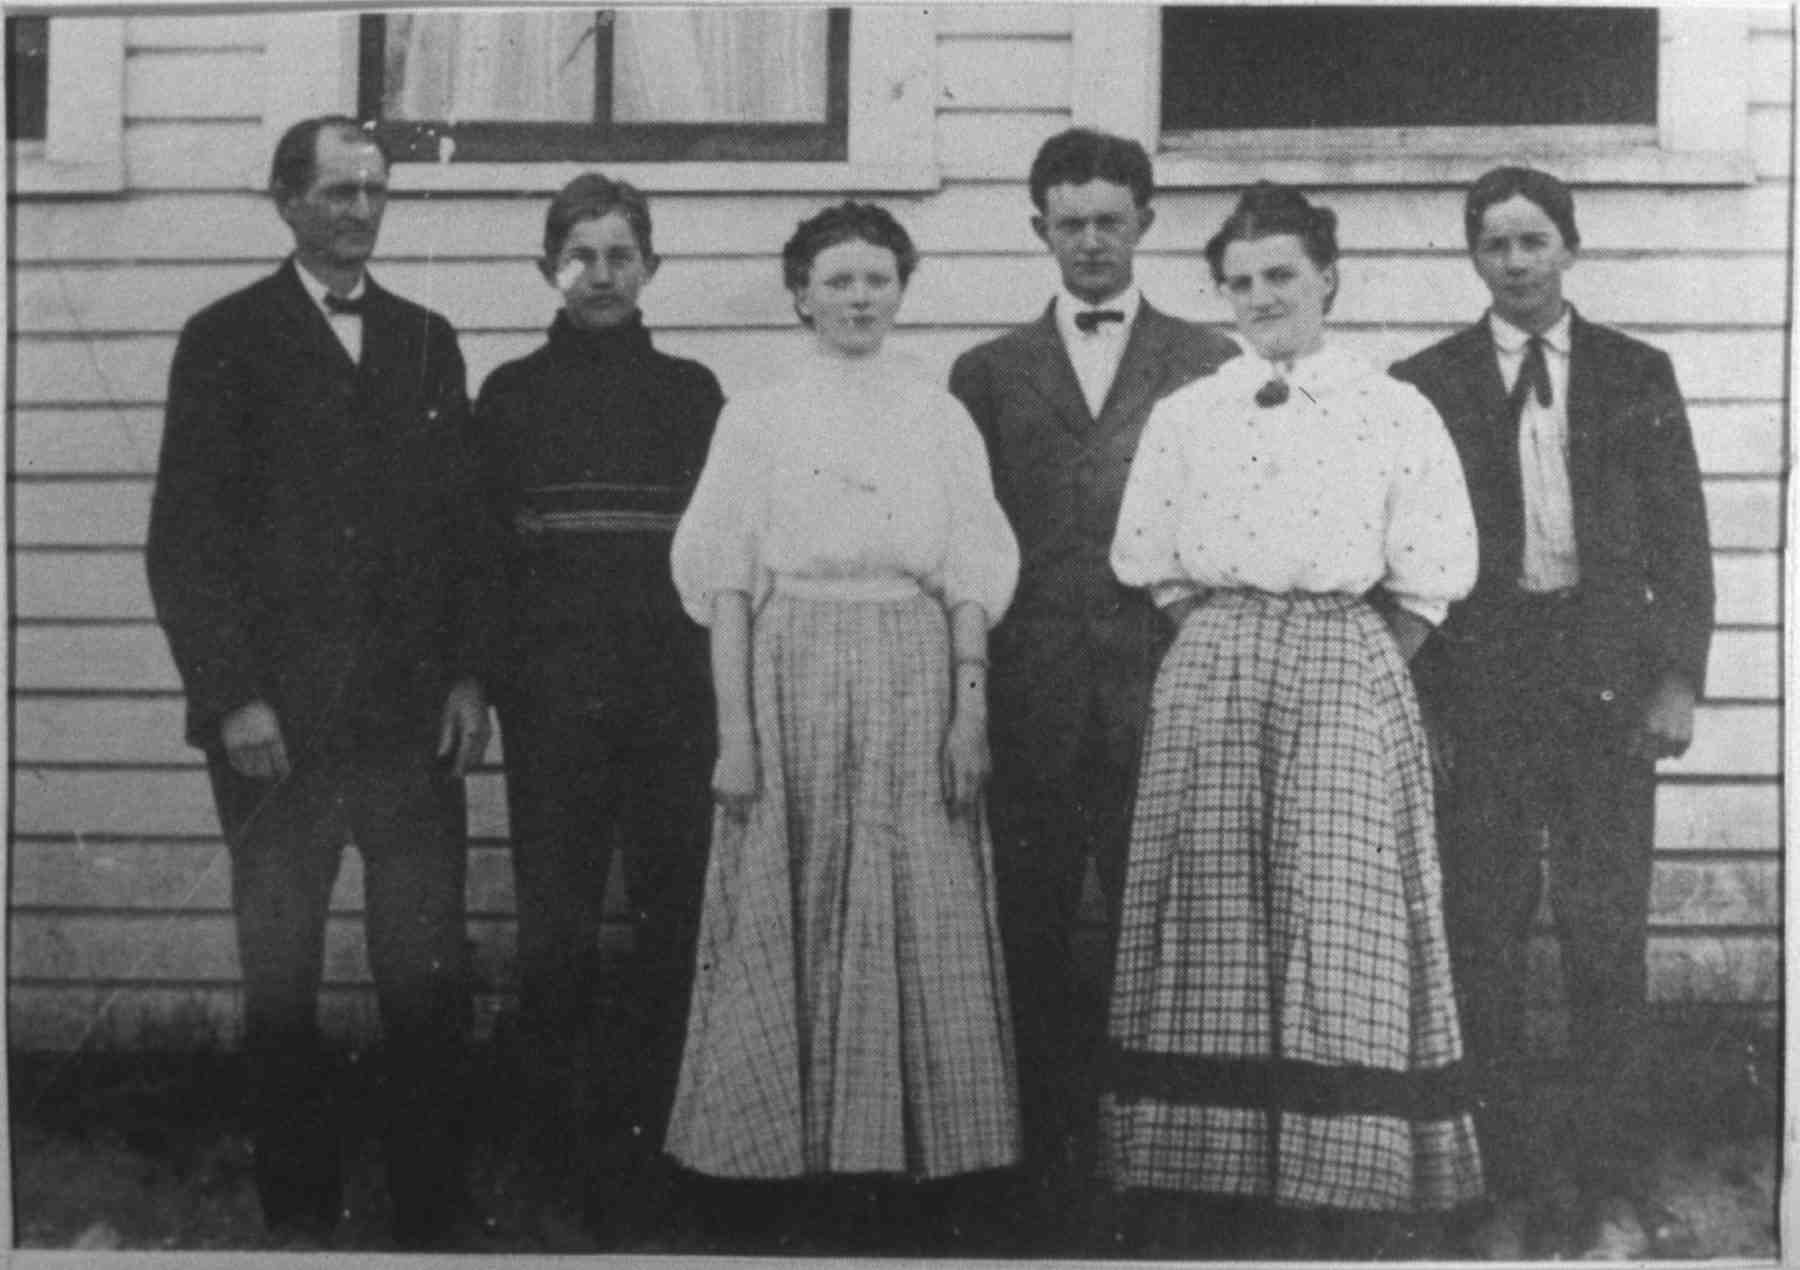 Henry Simonds in 1907 with students